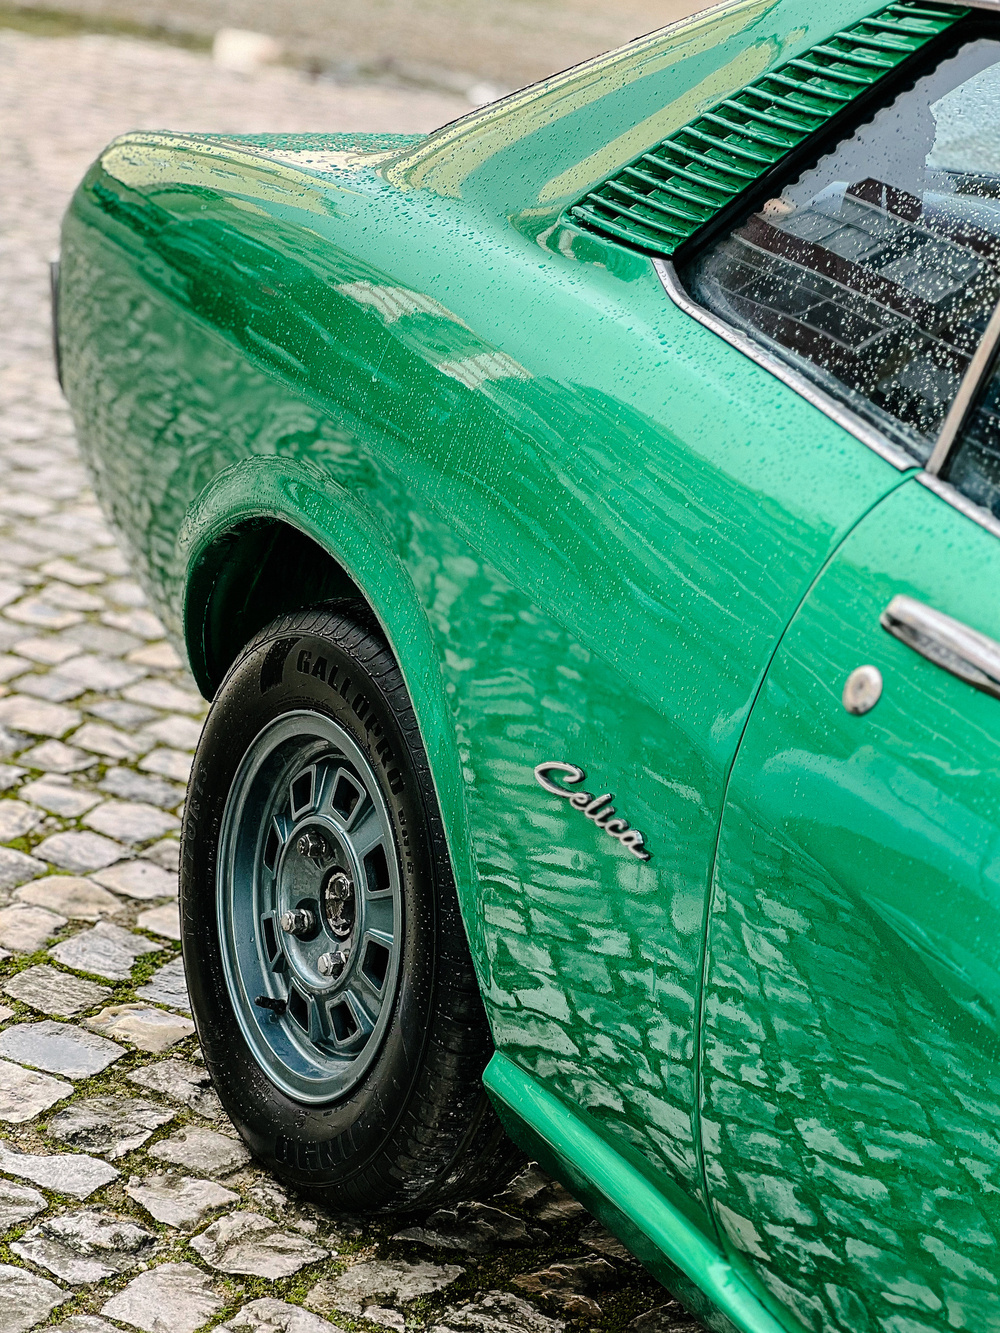 A classic green car with chrome wheels, wet with raindrops, parked on a cobblestone surface. Visible details include the rear side of the car with &ldquo;Celica&rdquo; written on it.